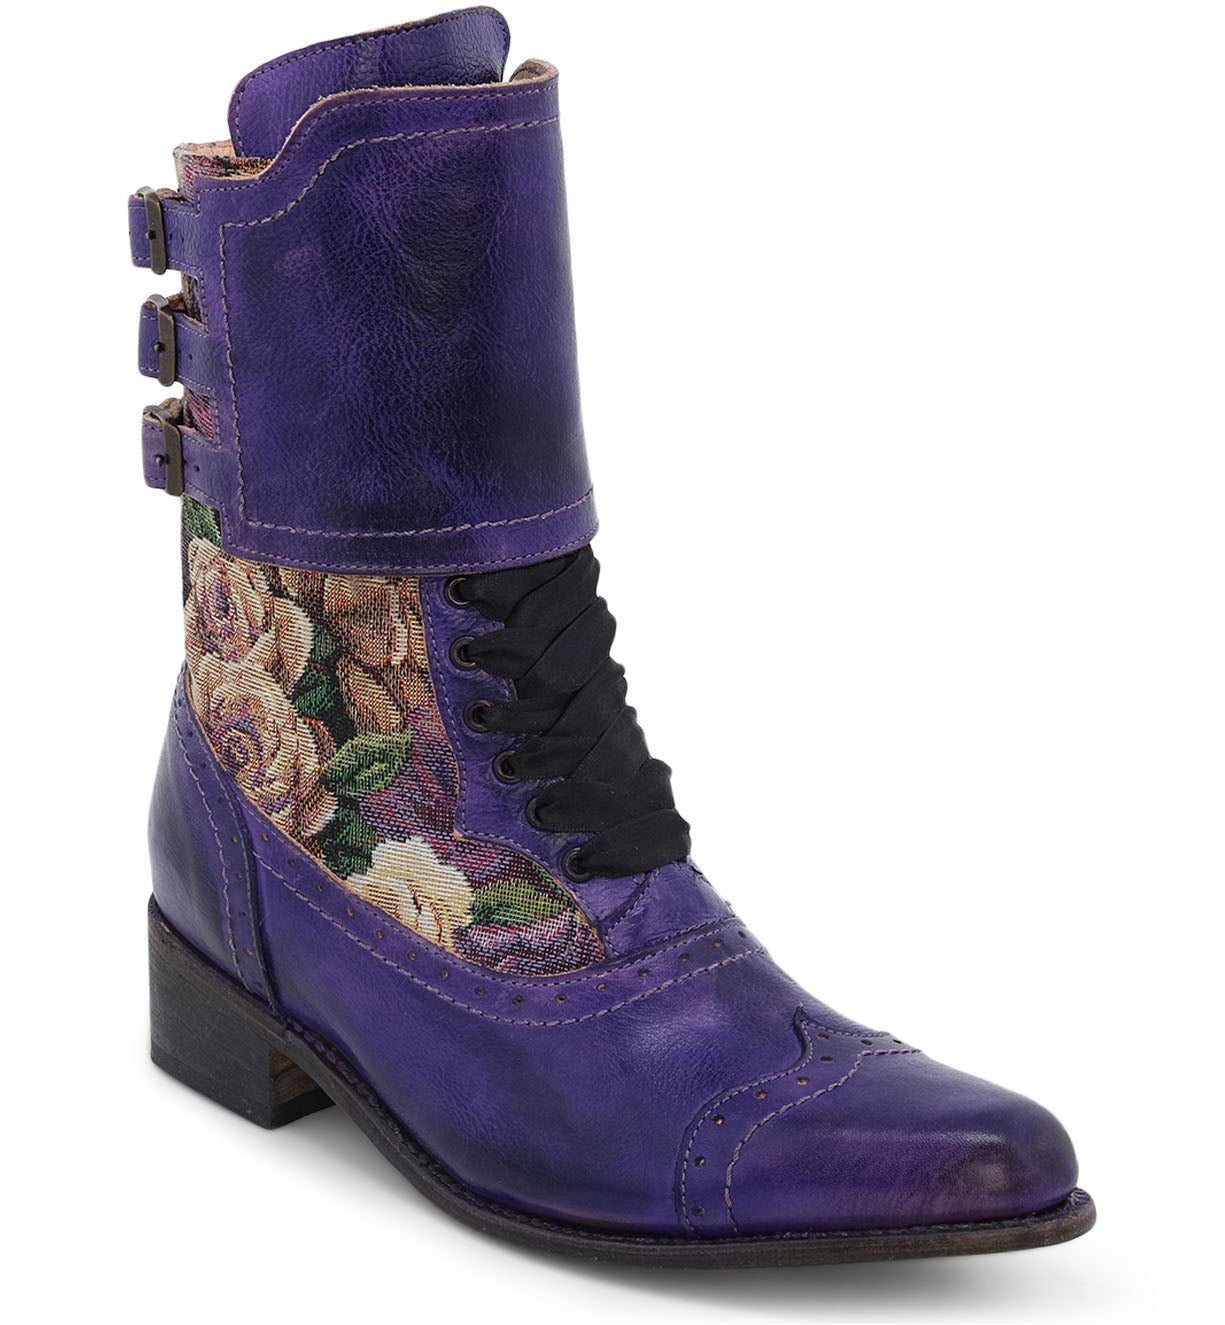 A pair of beautifully crafted Oak Tree Farms Faye leather boots adorned with intricate floral designs, in a striking purple hue.